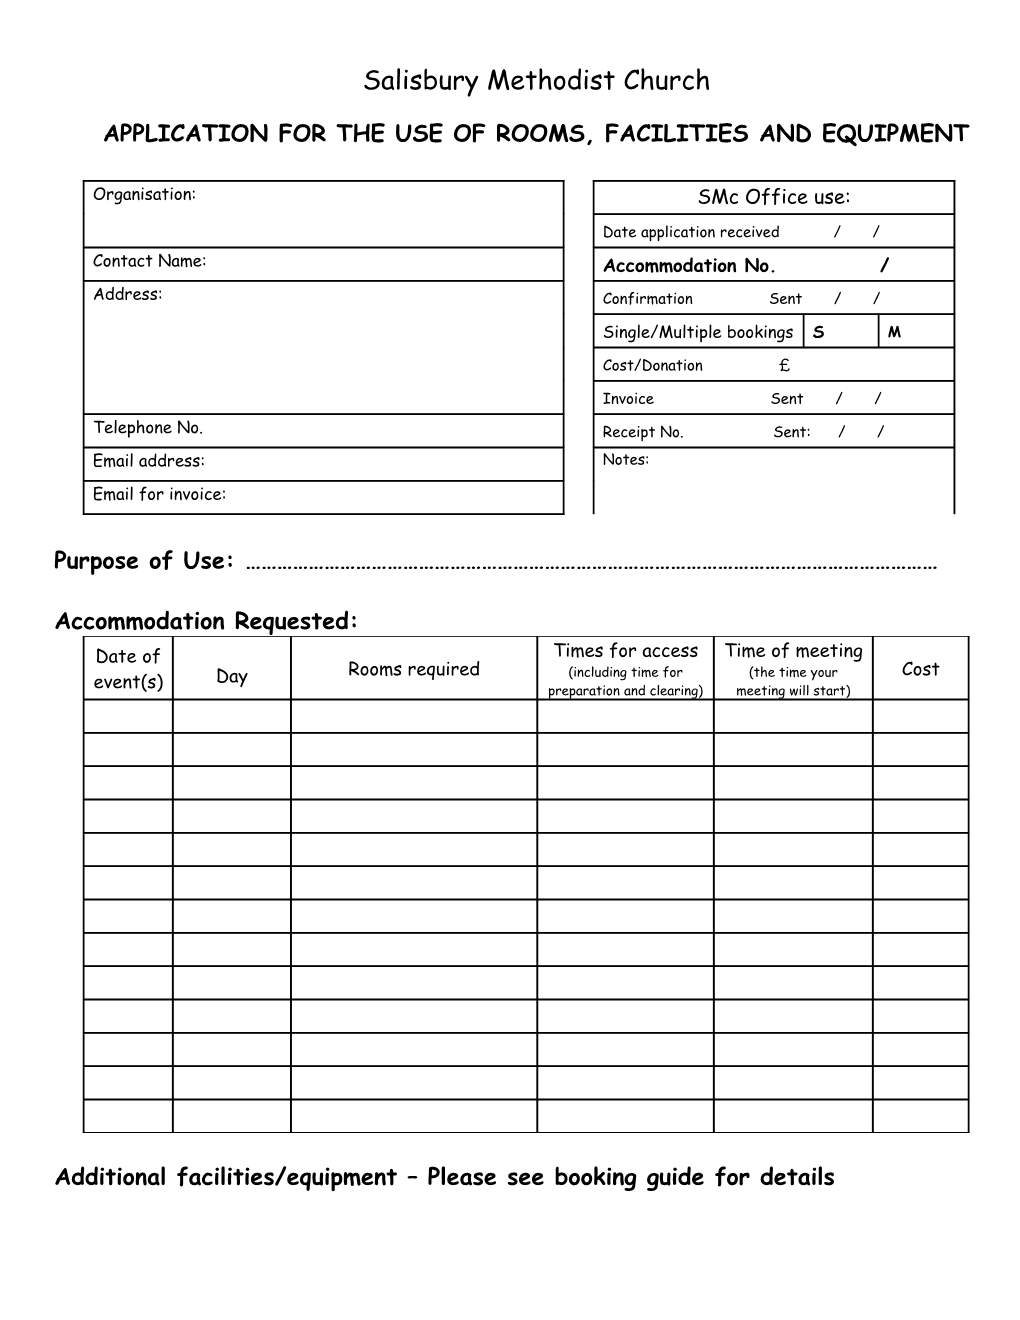 Application for the Use of Rooms, Facilities and Equipment